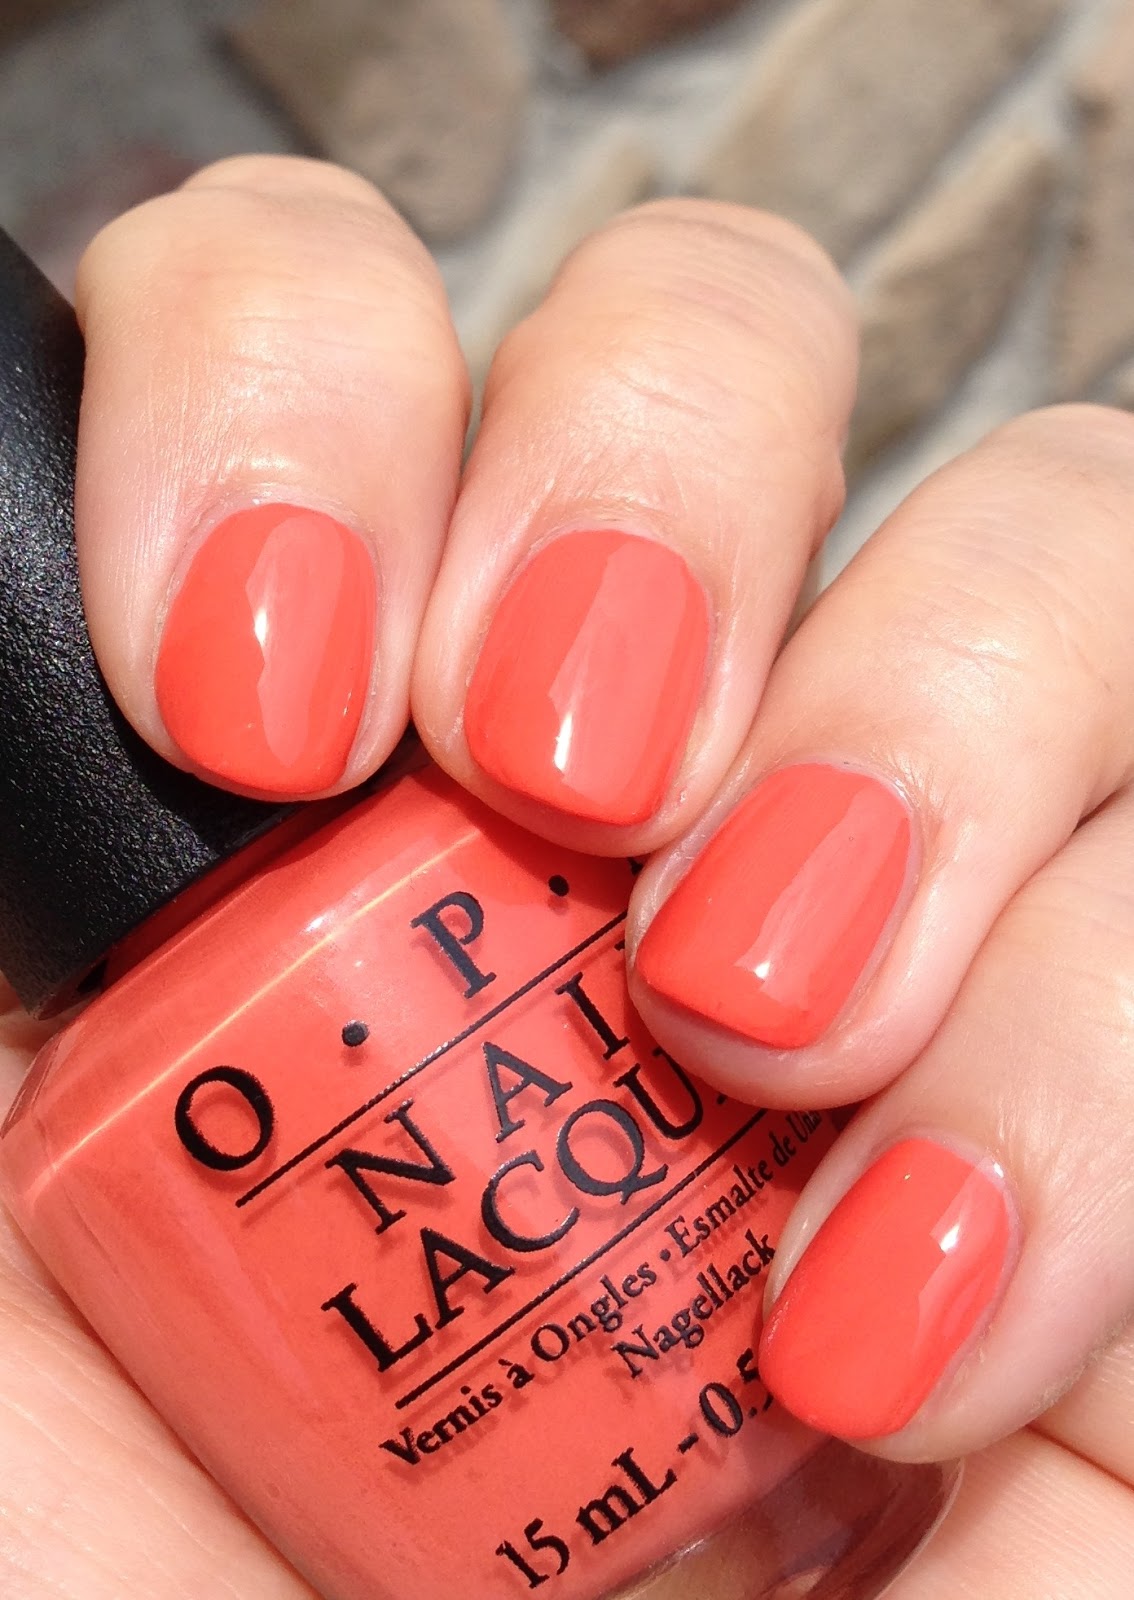 [OPI%2520Can%2527t%2520Afjord%2520Not%2520To%2520%25282%2529%255B11%255D.jpg]